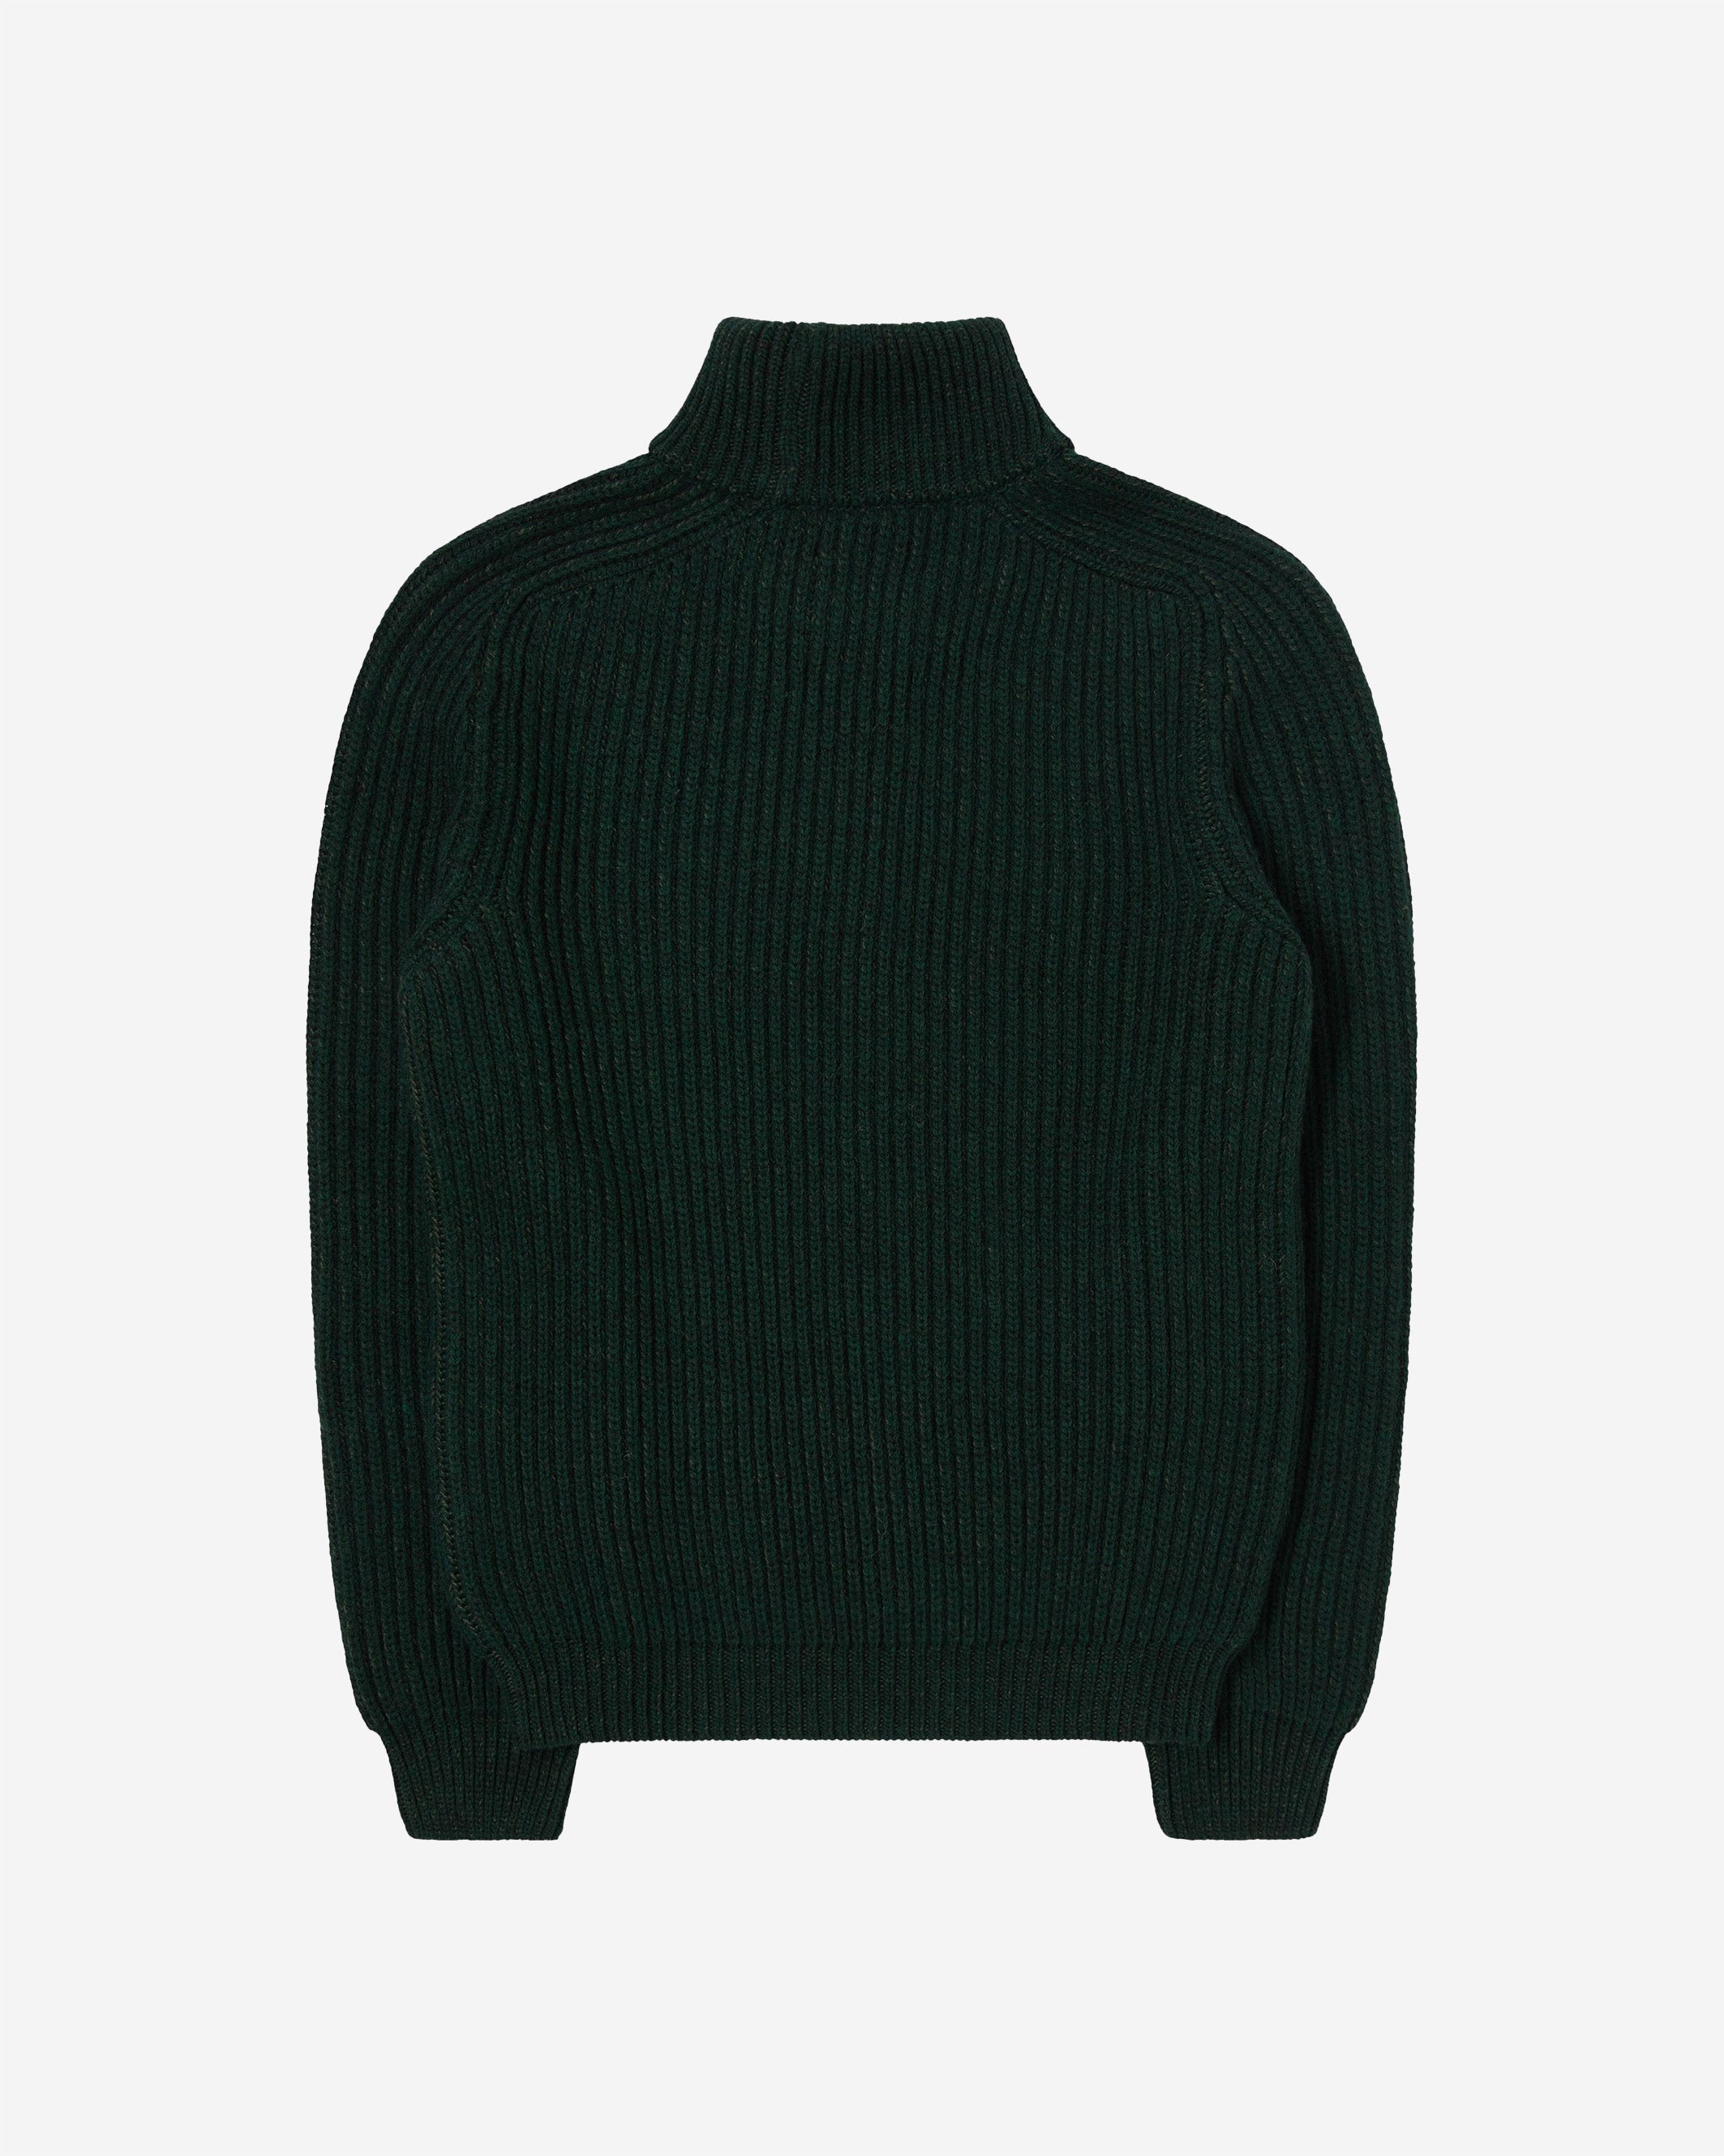 The EDWIN Roni High Collar Sweater is a green coloured, oversized fitting mixed Yarn Knitted Sweater. 50% Acrylic / 34% blended Wool / 10% Polyamid / 6% Alpaca Oversized Fit Full Cardigan Knit